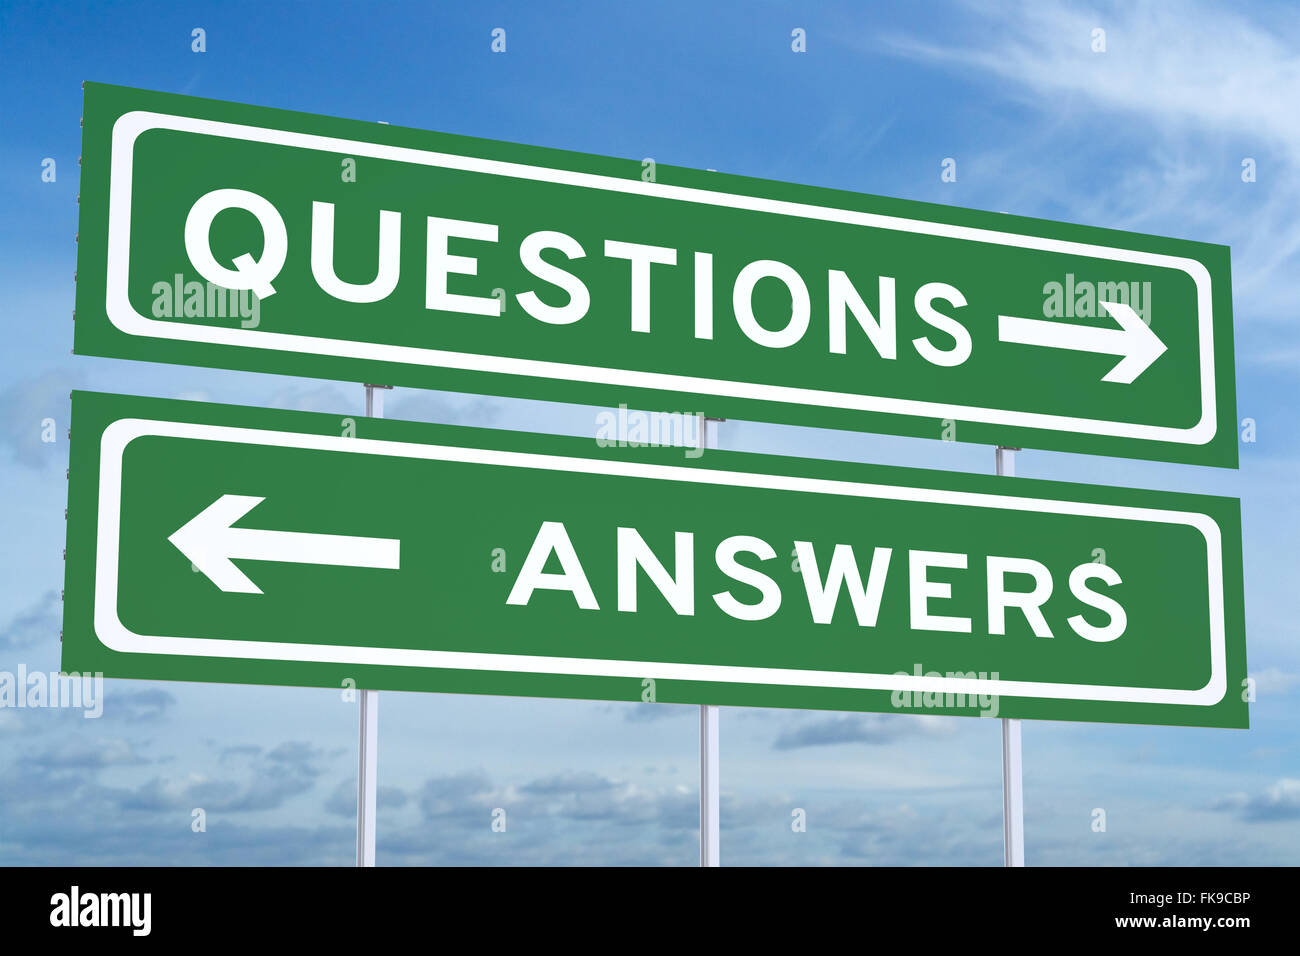 questions or answers concept on the road signs Stock Photo